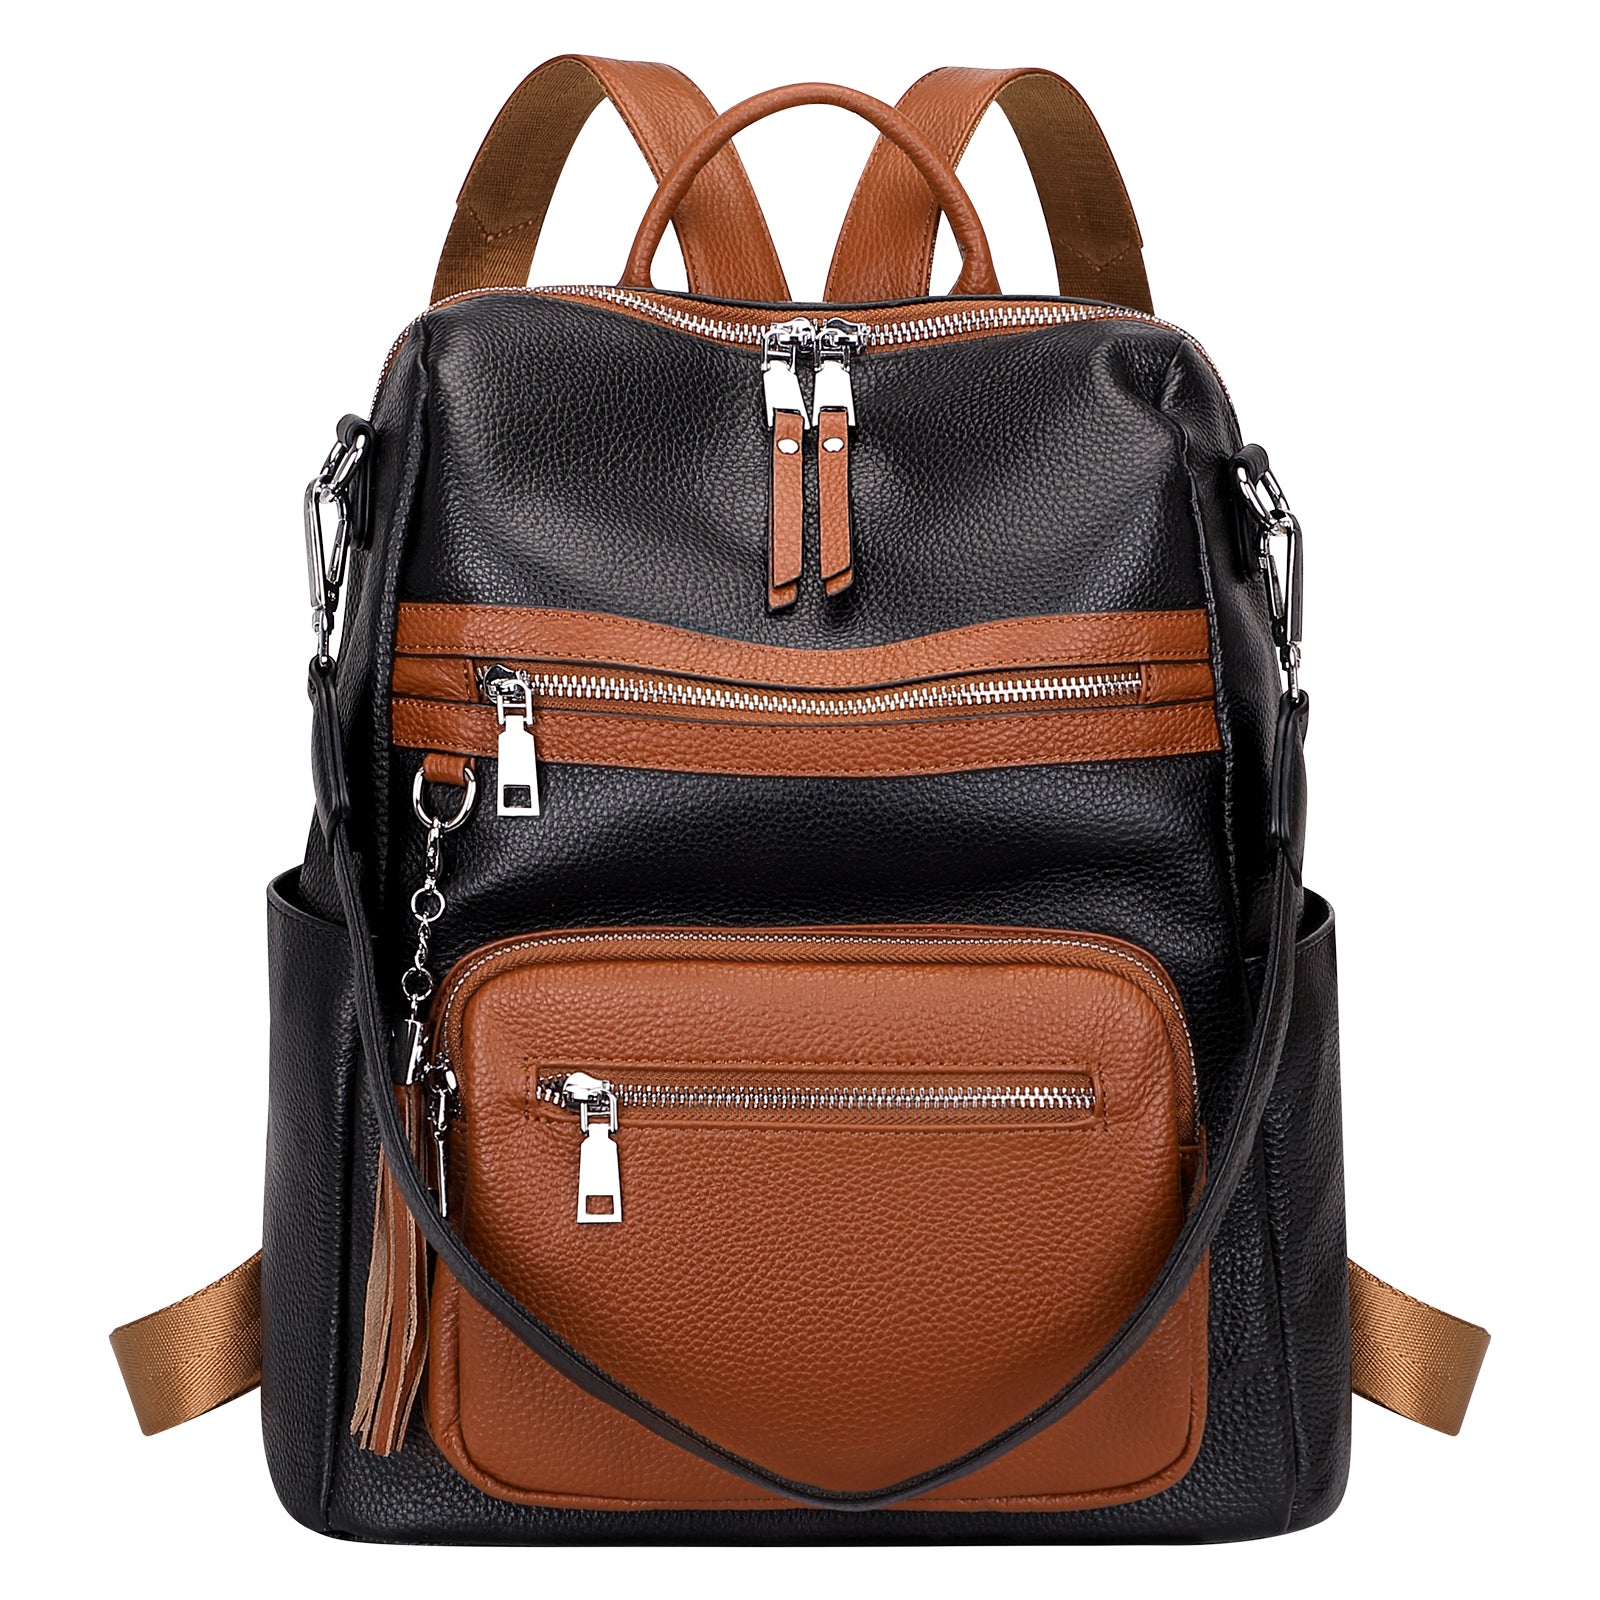 Buy Leather World 15.6 inch PU Leather Travel USB College Laptop Backpack  Men Women Online